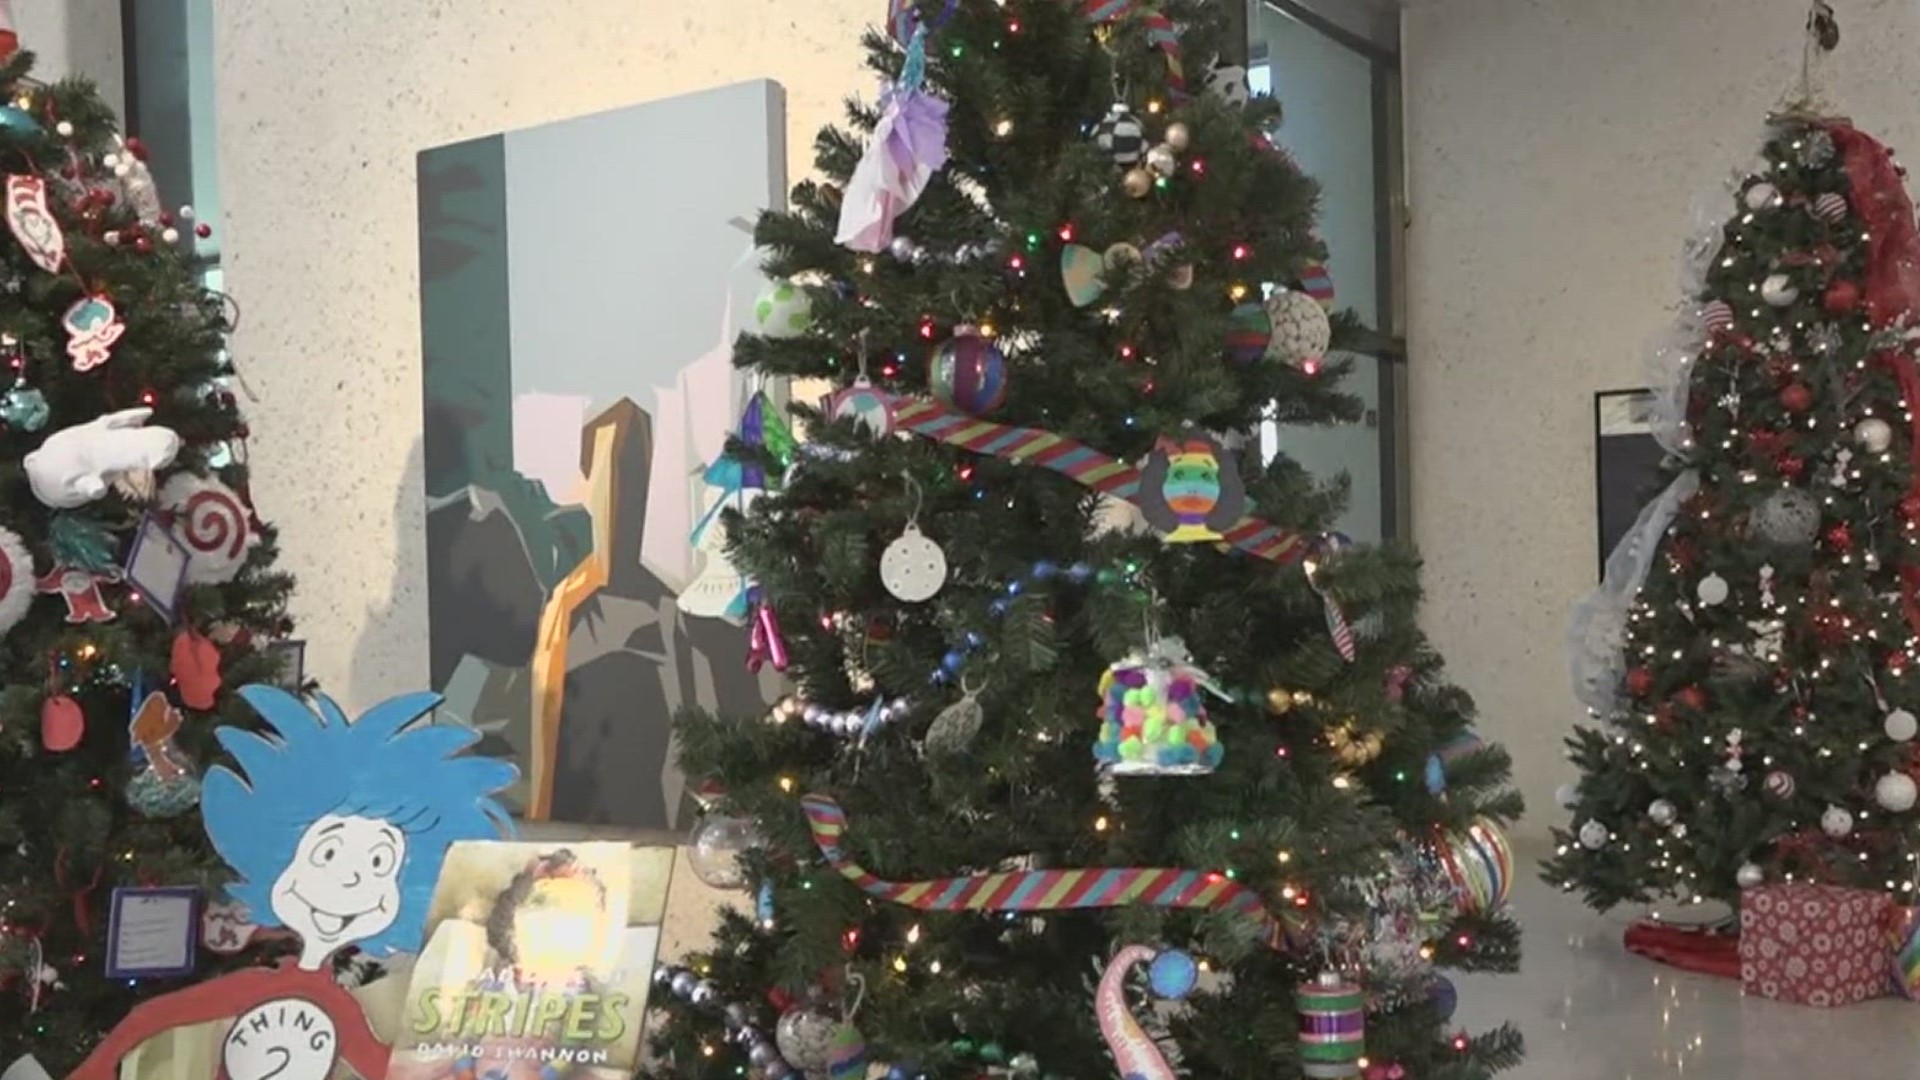 The free event will feature 30 trees, each decorated as a beloved children’s book.